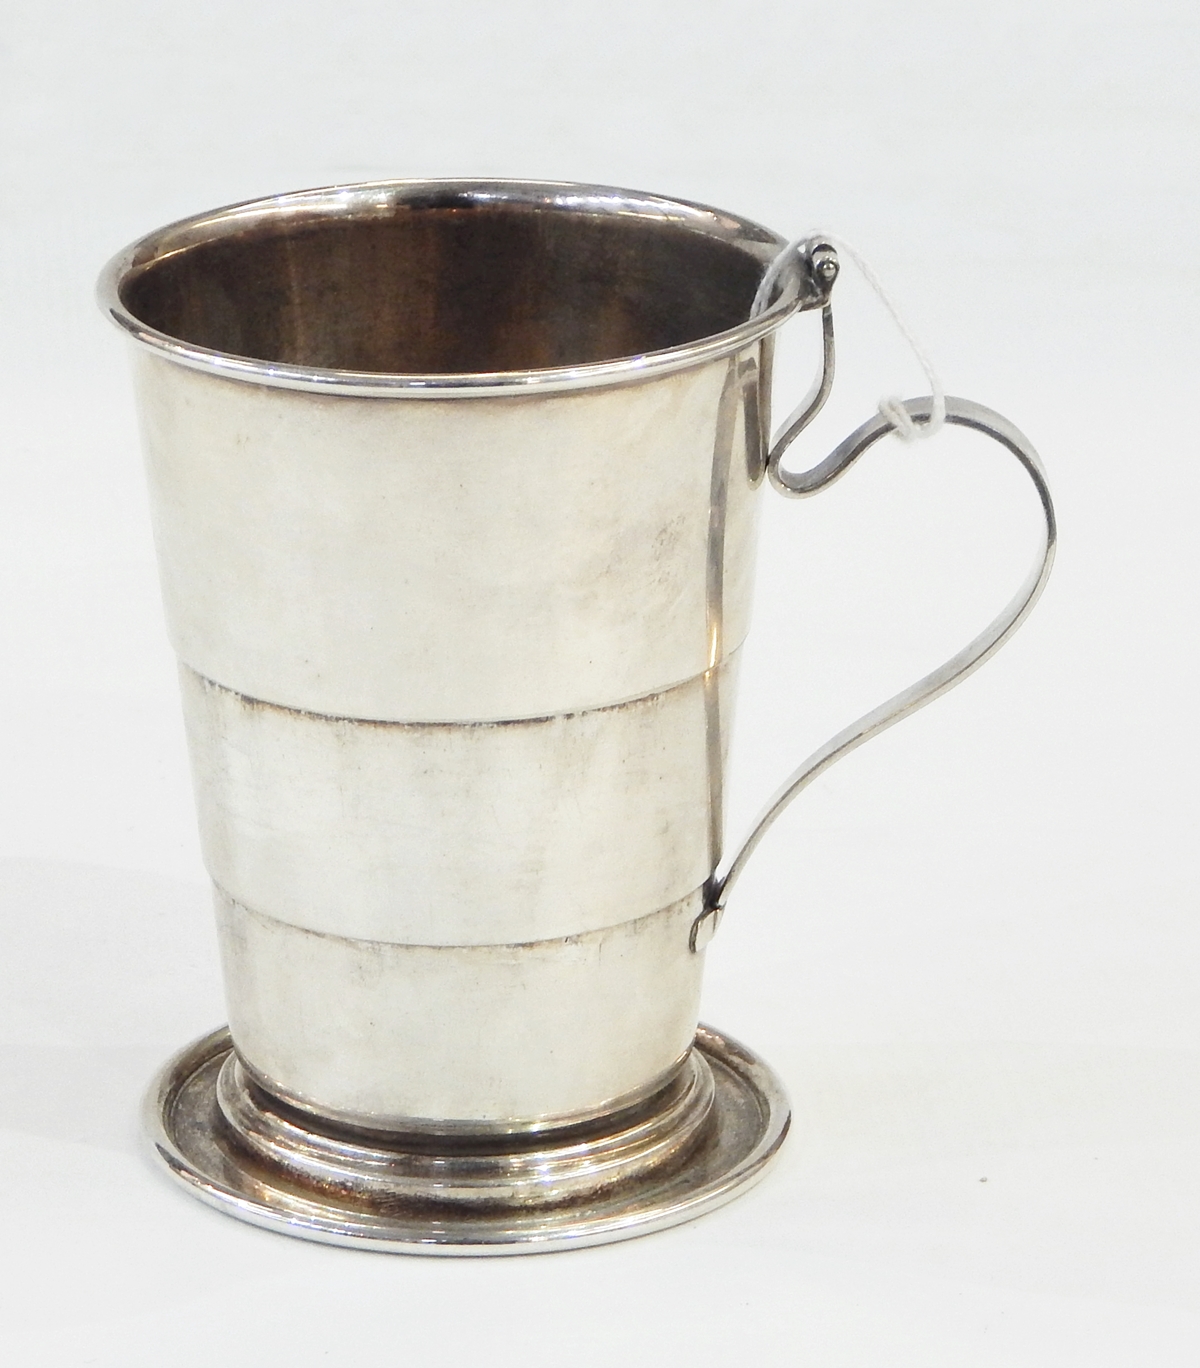 Silver plated collapsible travelling mug with handle, made by Goldsmiths Silversmiths Company,